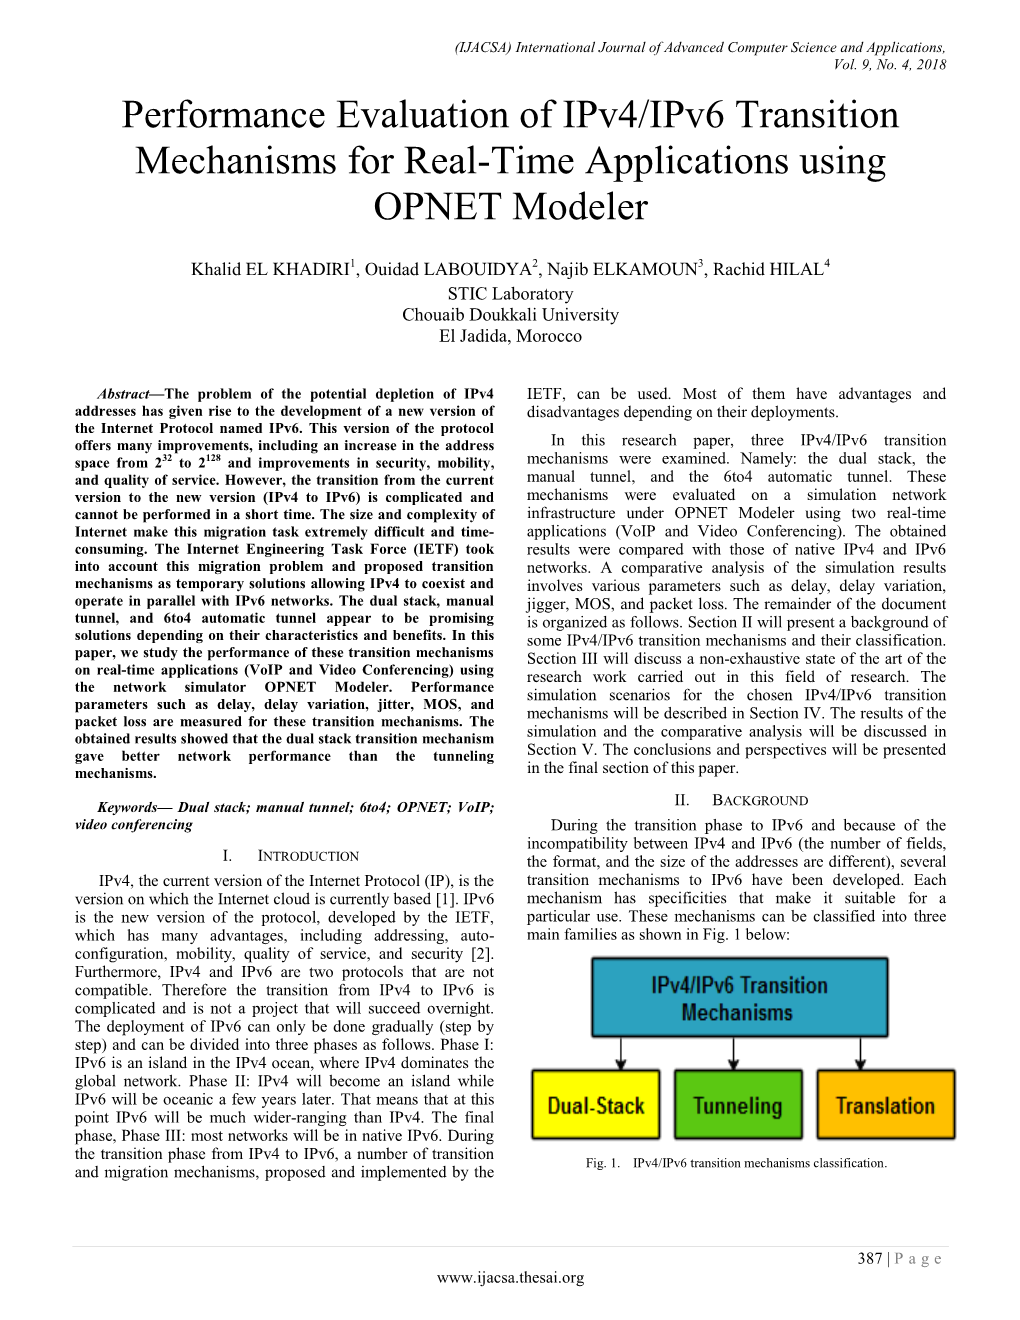 Performance Evaluation of Ipv4/Ipv6 Transition Mechanisms for Real-Time Applications Using OPNET Modeler